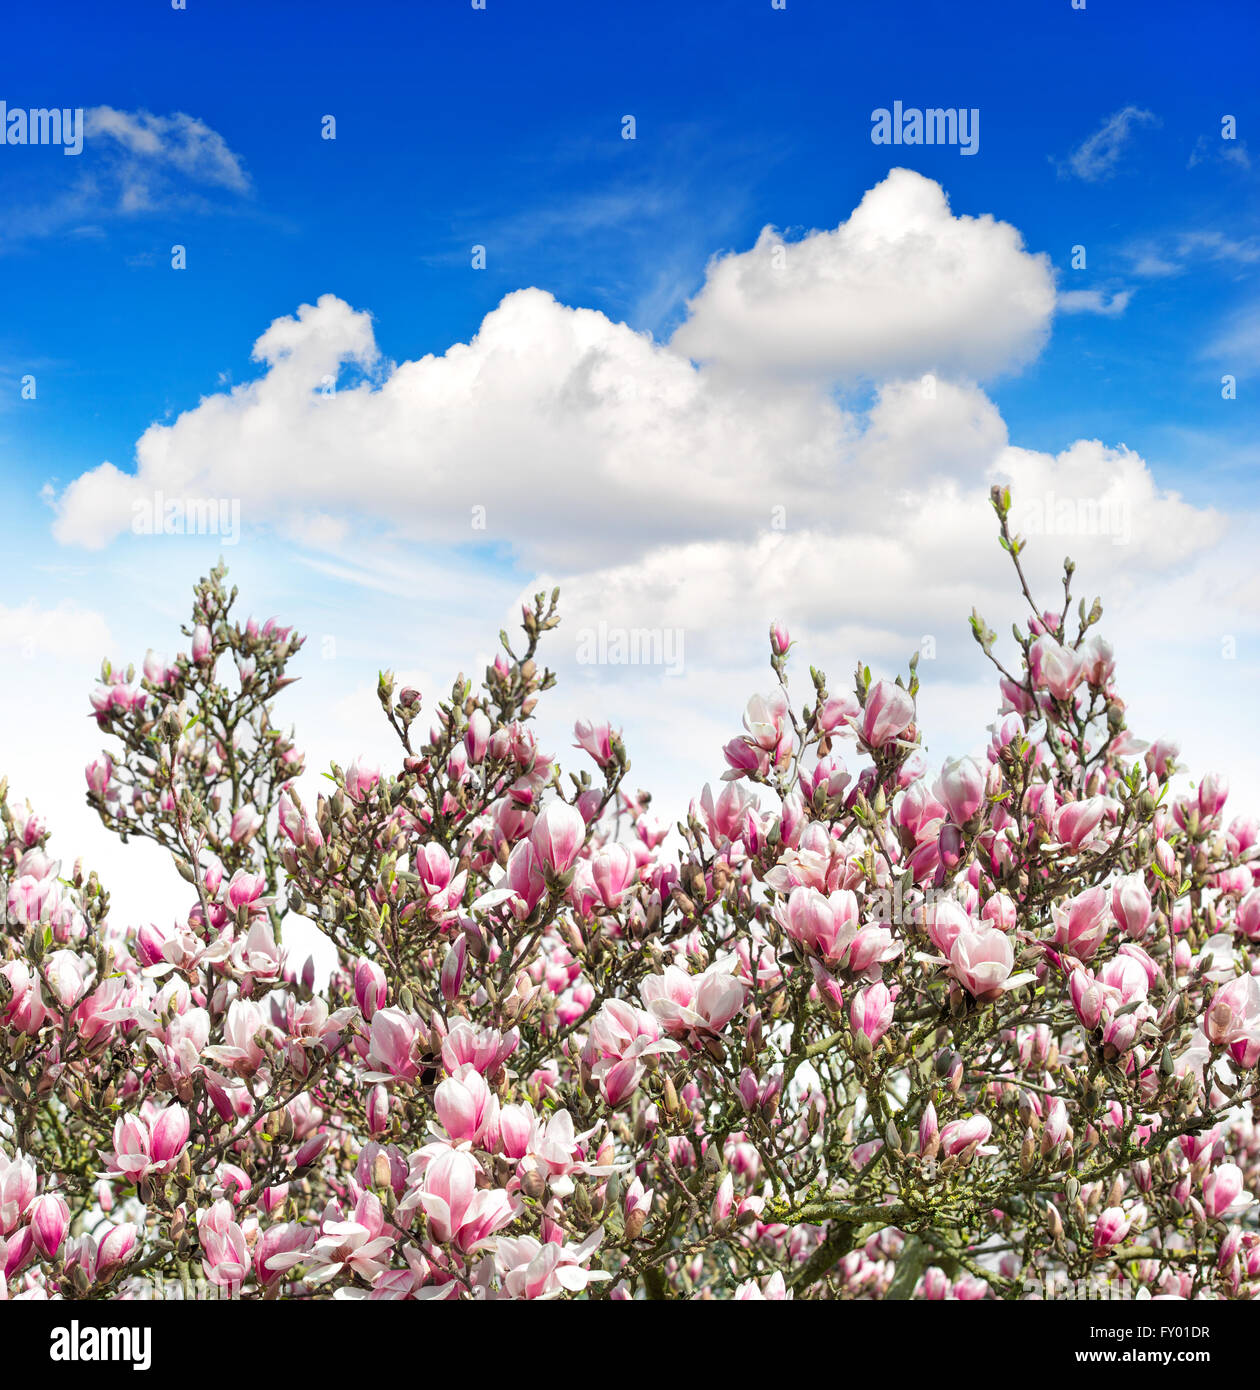 Magnolia tree over cloudy blue sky. Blossoming of spring pink flowers. Nature background Stock Photo